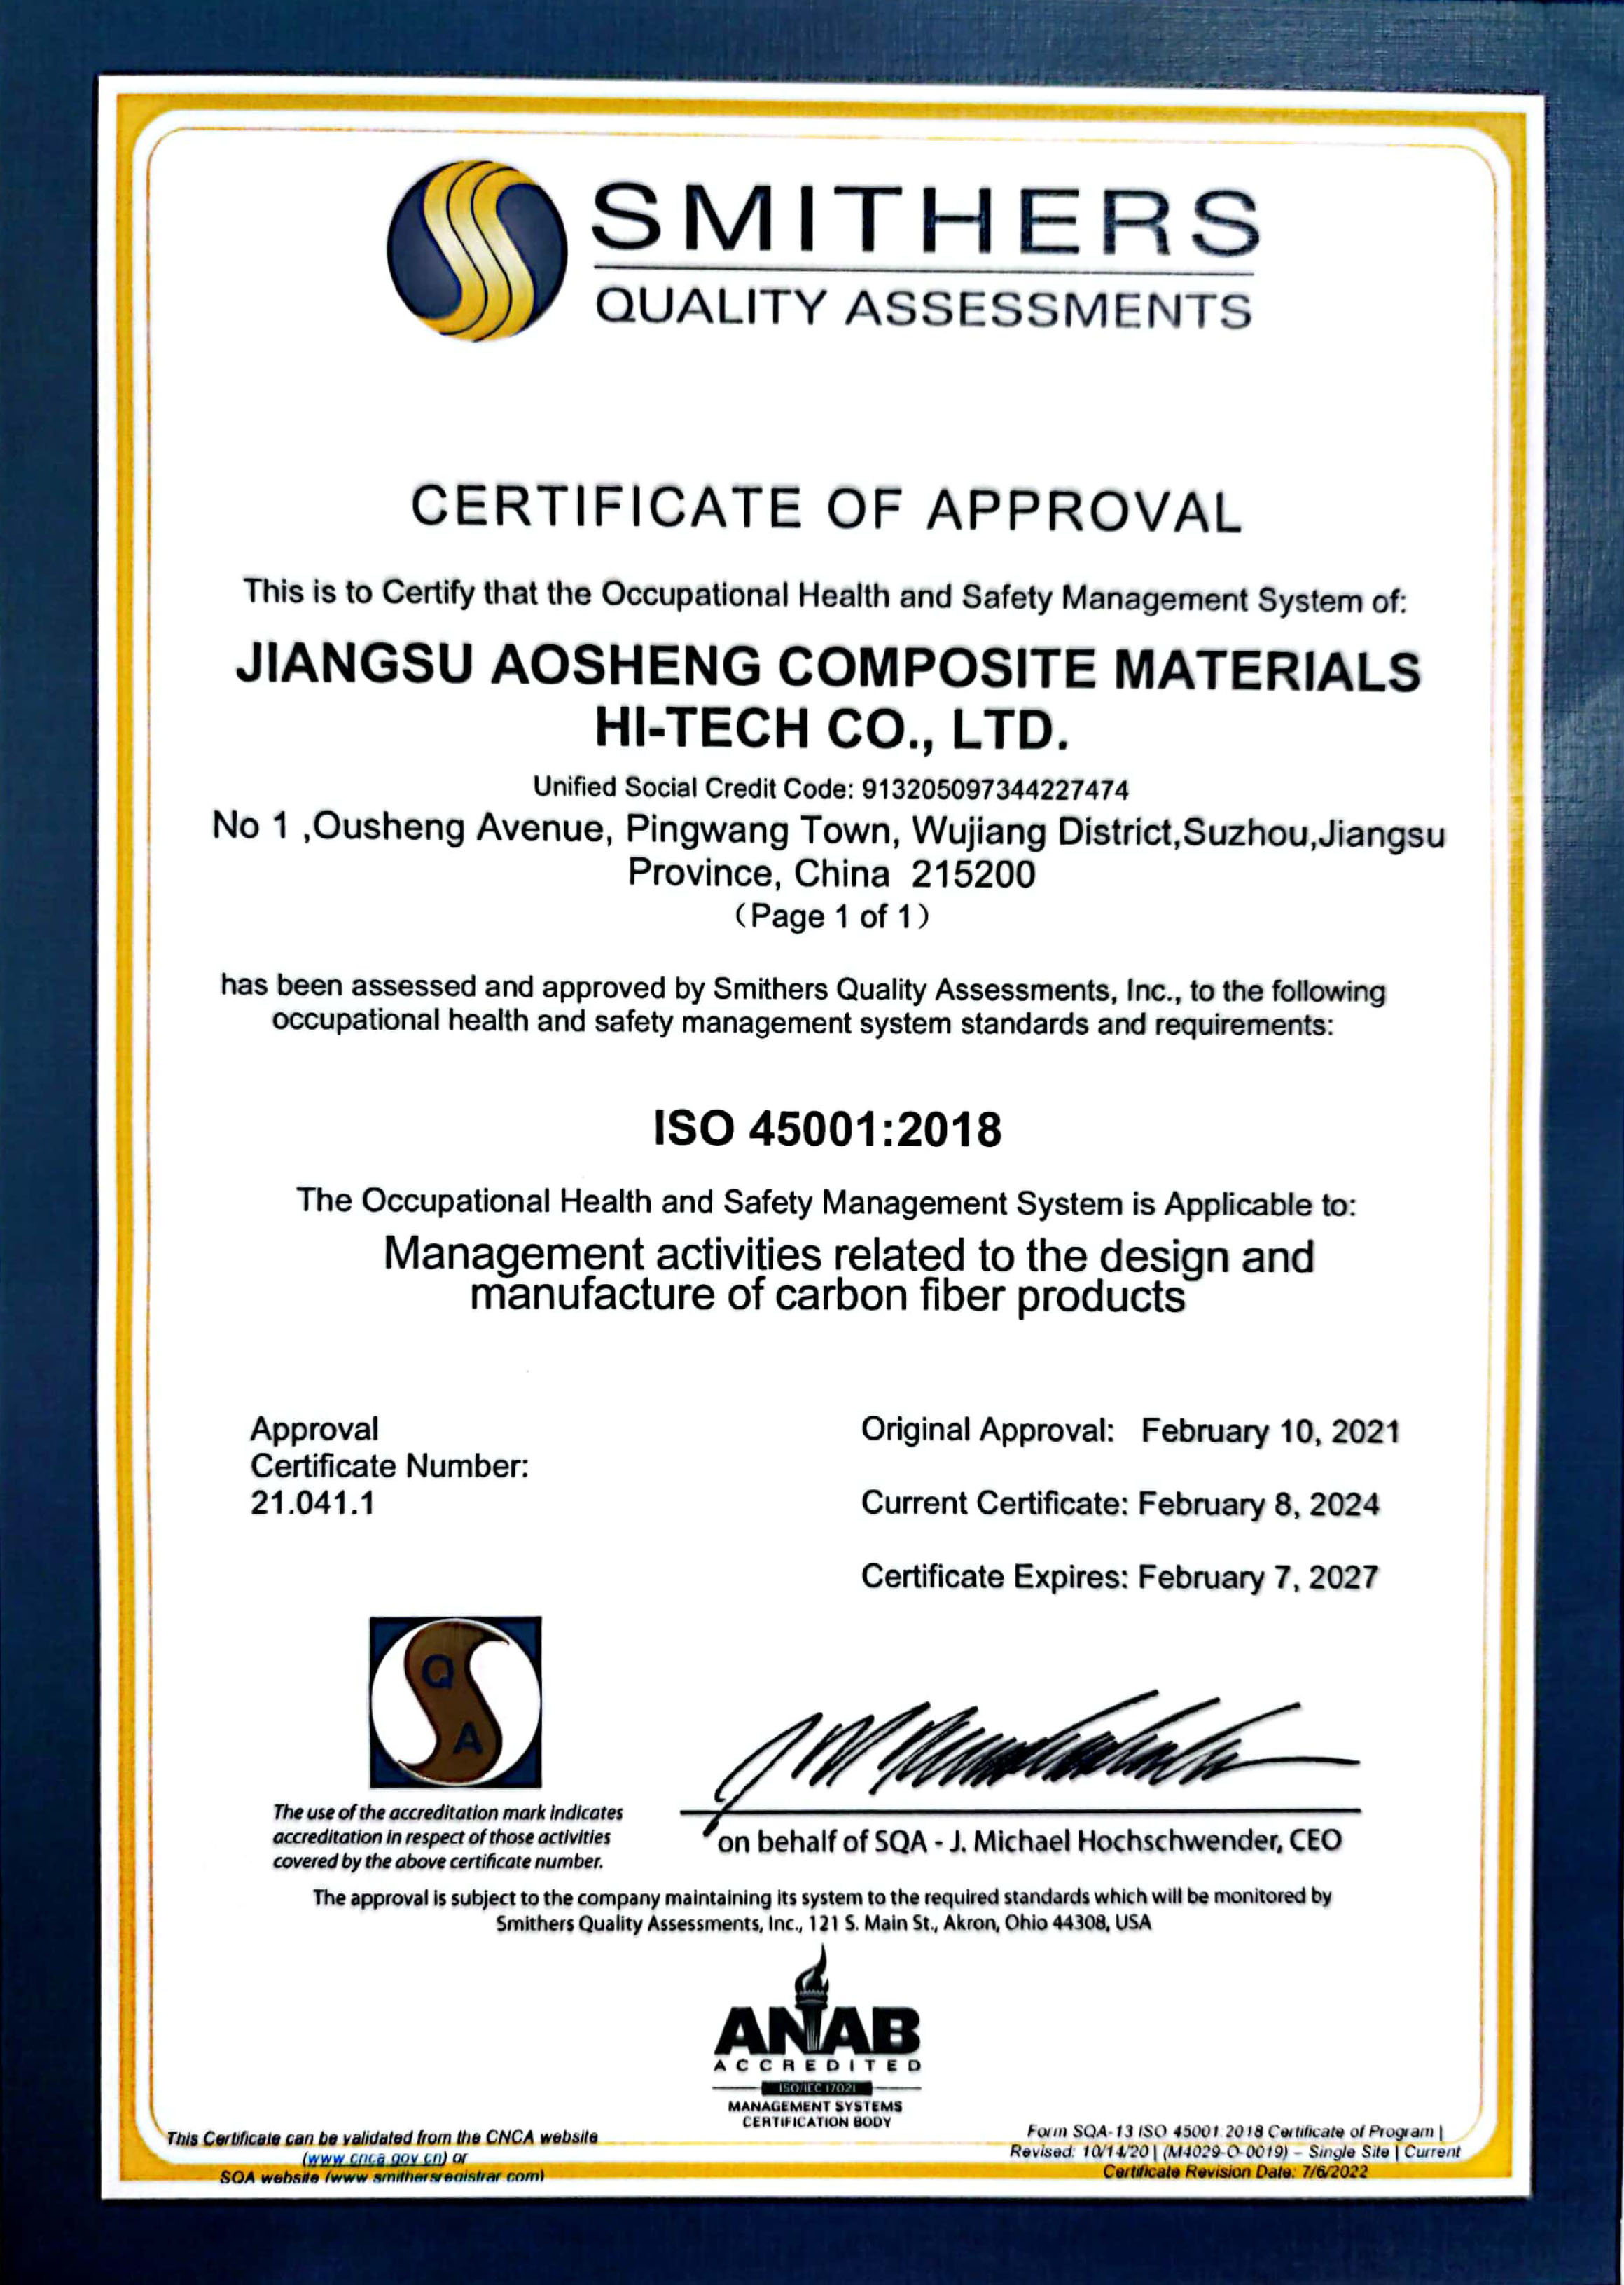 45001 CERTIFICATE OF APPROVAL